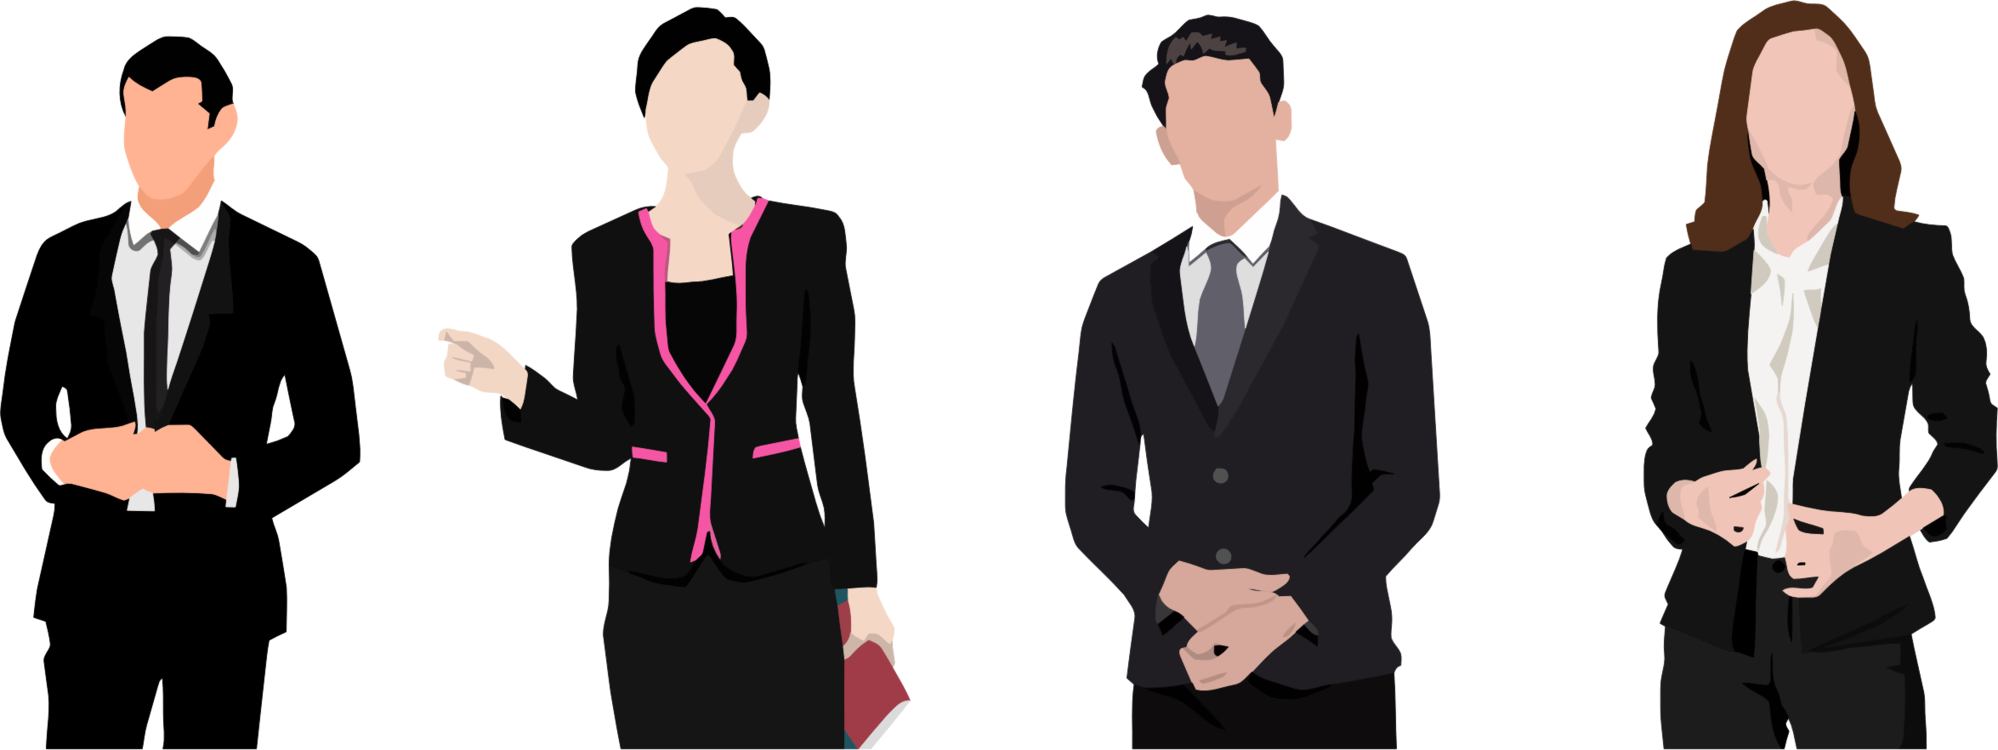 A Man And Woman In Suits